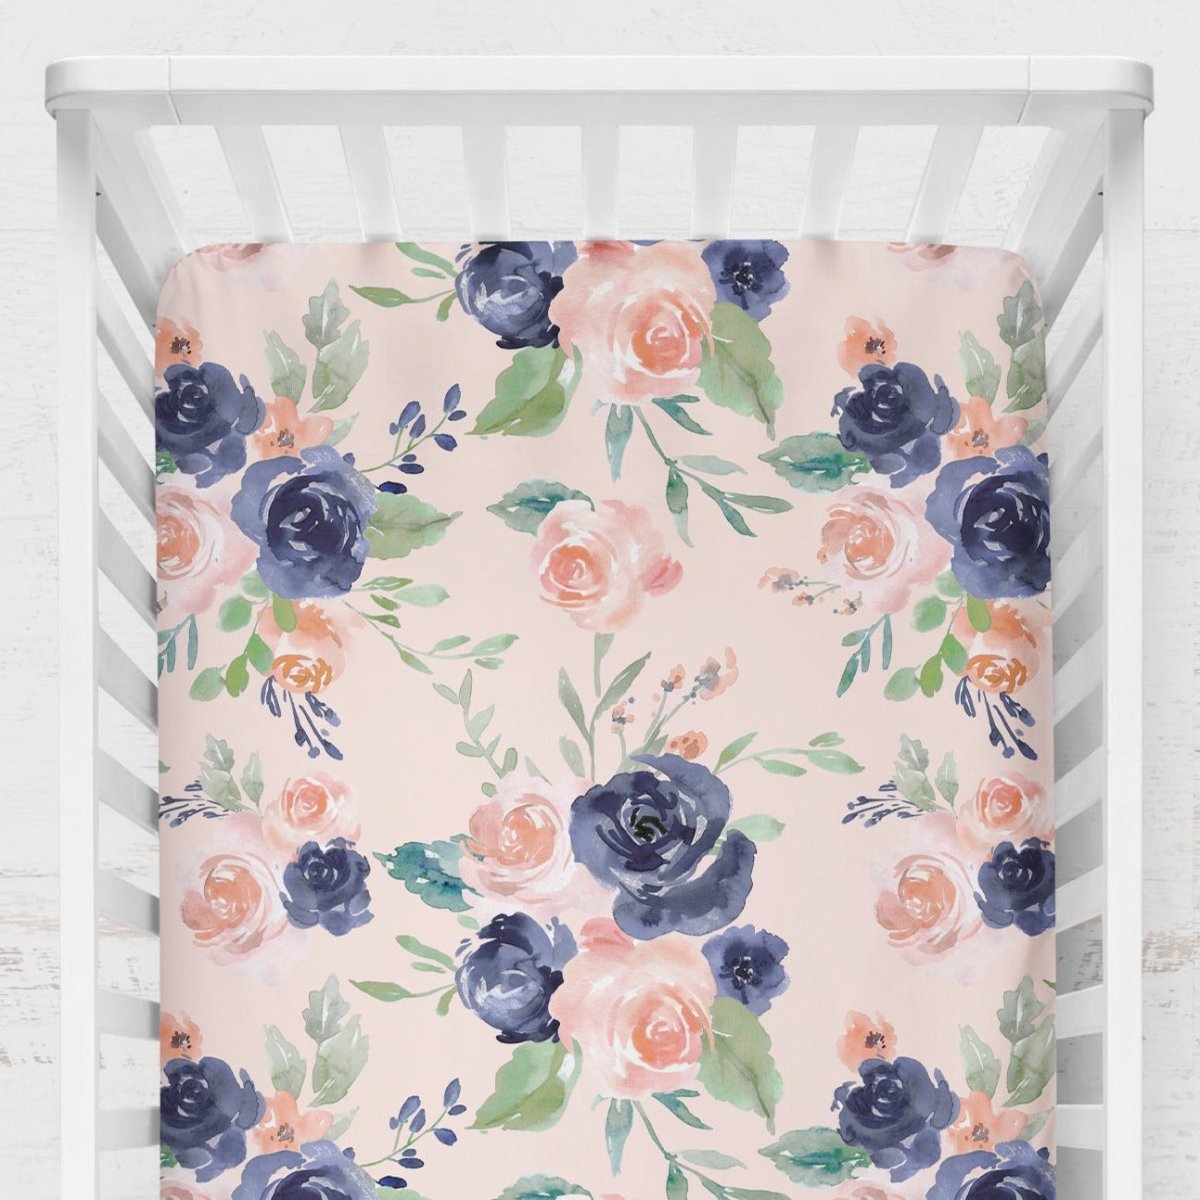 Peach & Navy Floral Nursery Collection - gender_girl, Peach & Navy Floral, text